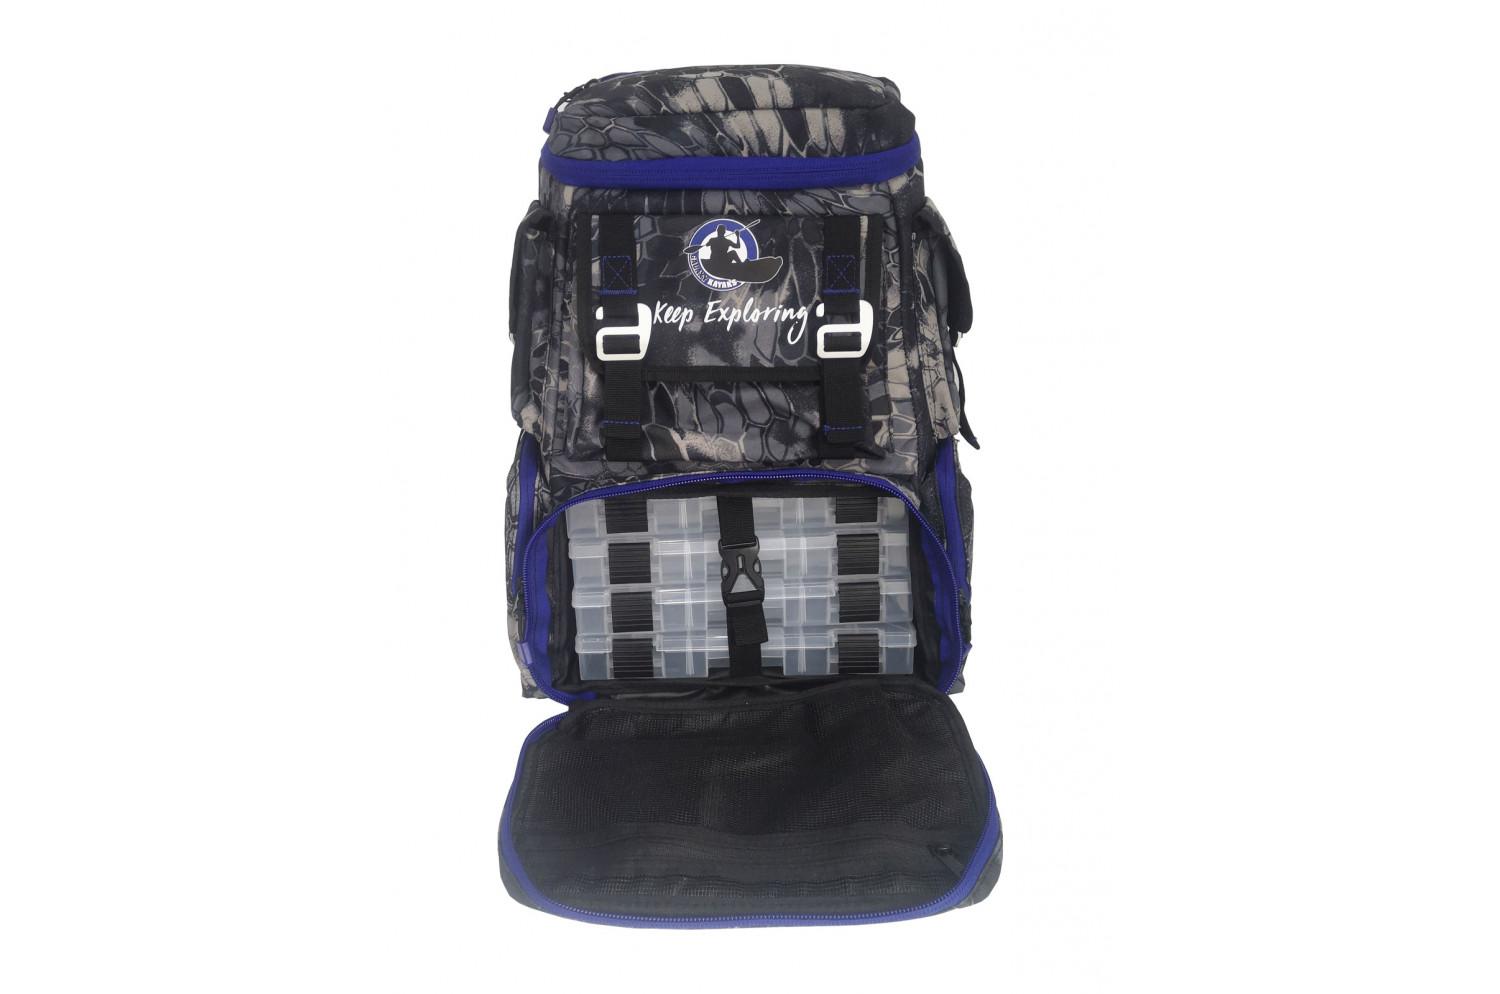 The Galaxy Tackle bag is the ideal companion on your next kayak fishing  adventure.